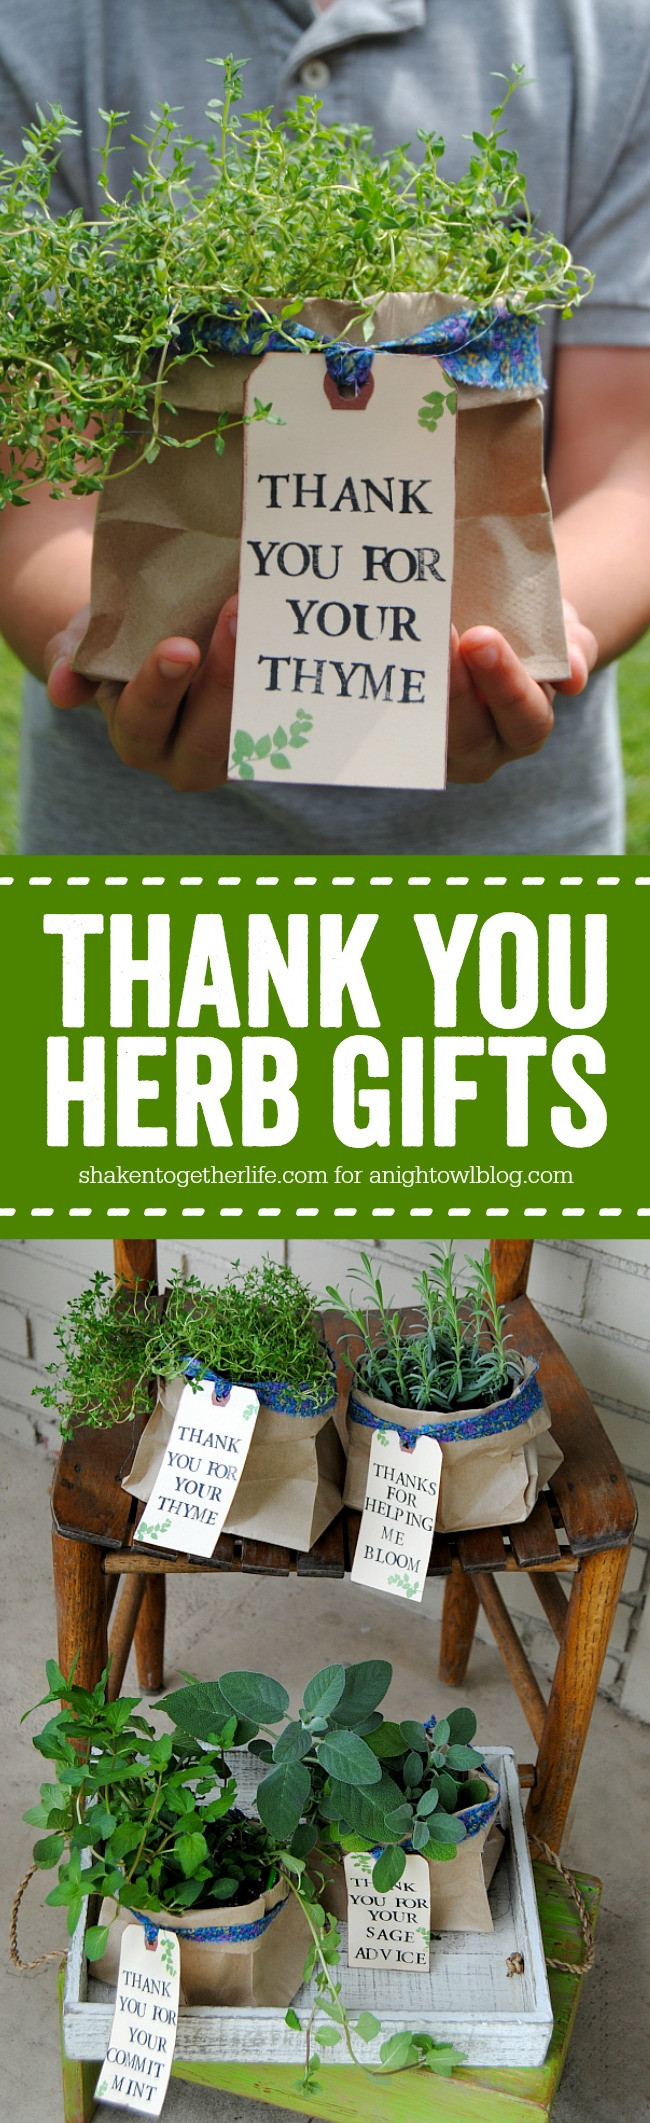 Thank You Gift Ideas For Neighbors
 Thank You Herb Gifts